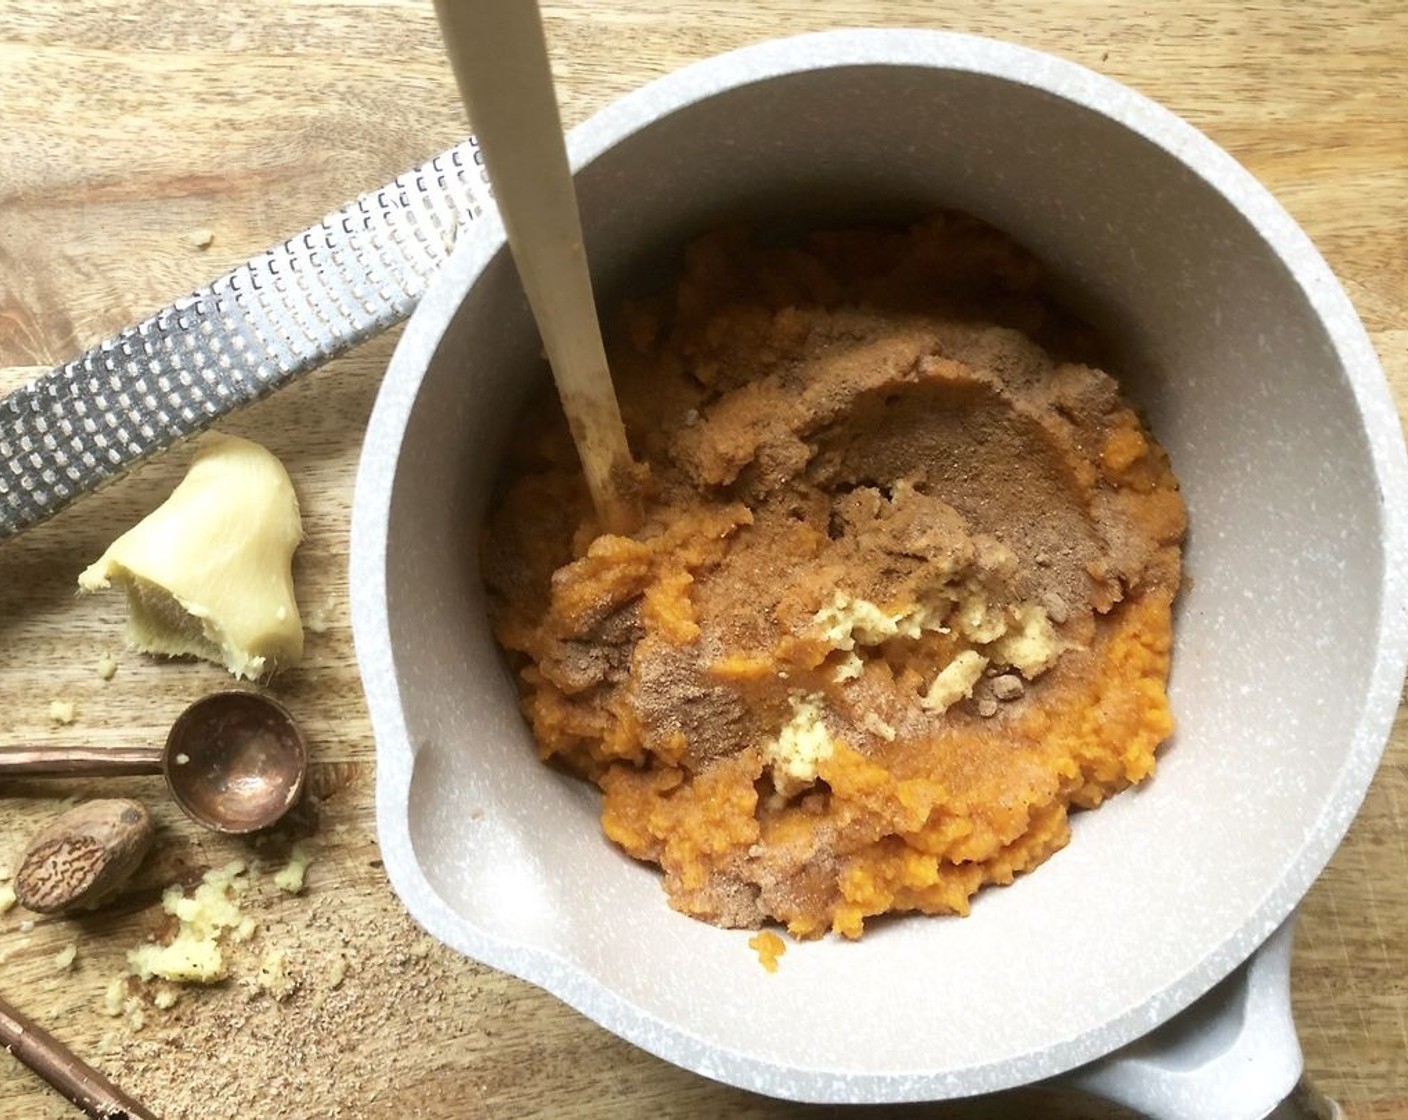 step 1 In a medium saucepan, combine the Unsweetened Pumpkin Purée (1 can), Fresh Ginger (1 tsp), Ground Cinnamon (1/4 tsp), Ground Nutmeg (1/4 tsp), and a pinch of Kosher Salt (to taste). Cook over medium heat, stirring frequently until steaming heavily, darker in color and slightly thicker, about 5 minutes.